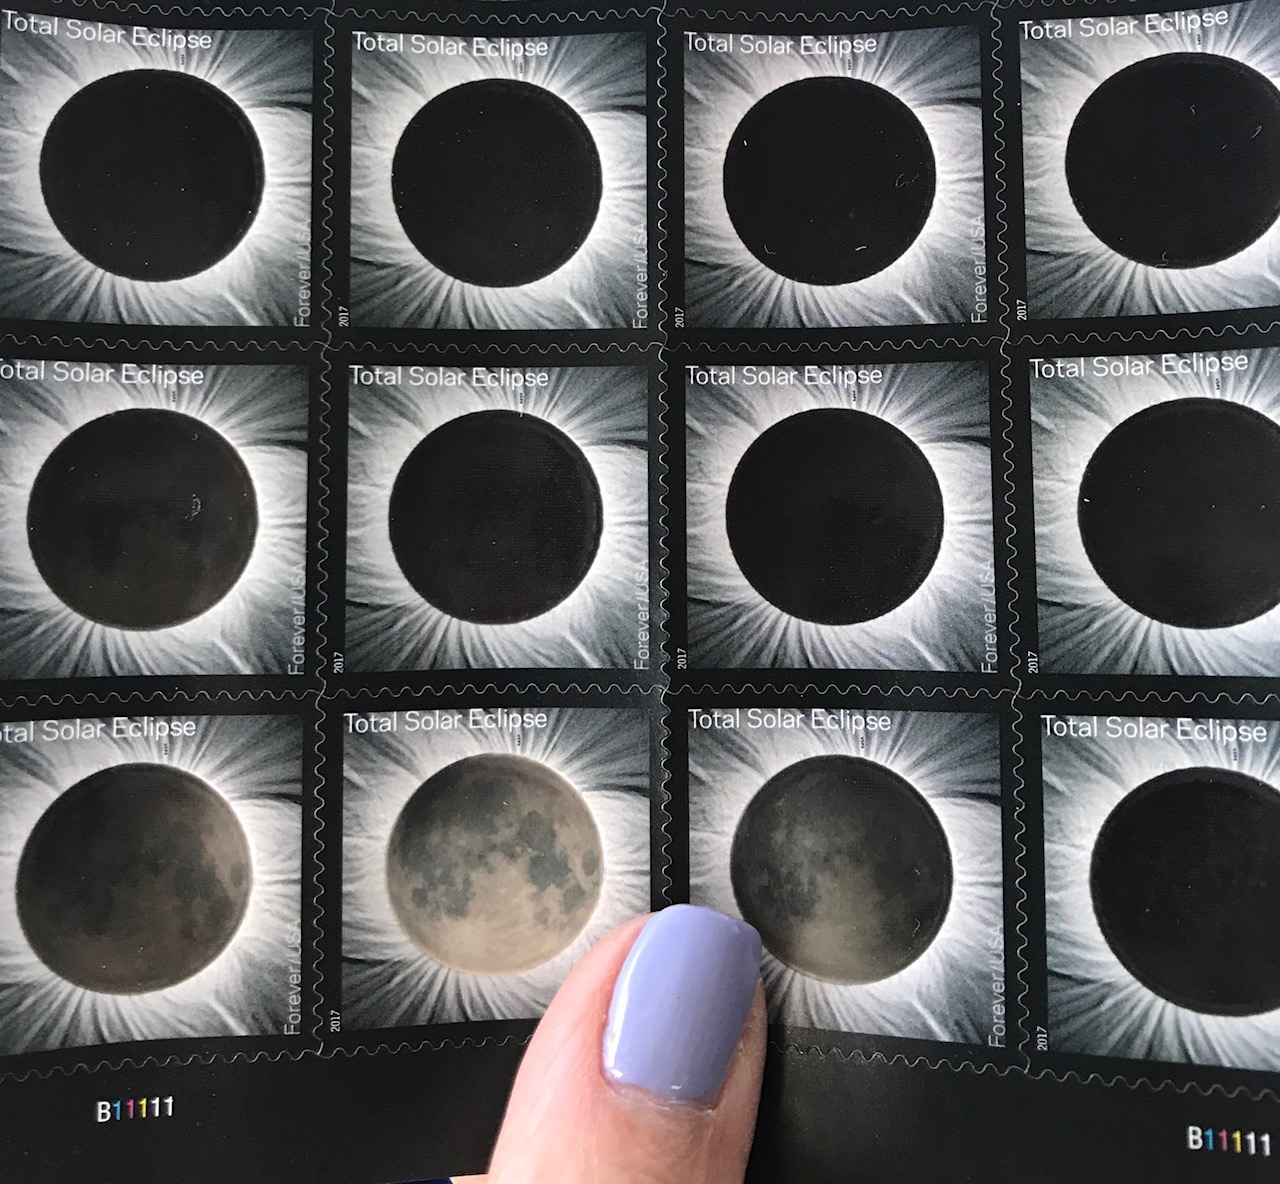 Total Eclipse Stamps that Change Color | Cool Mom Tech